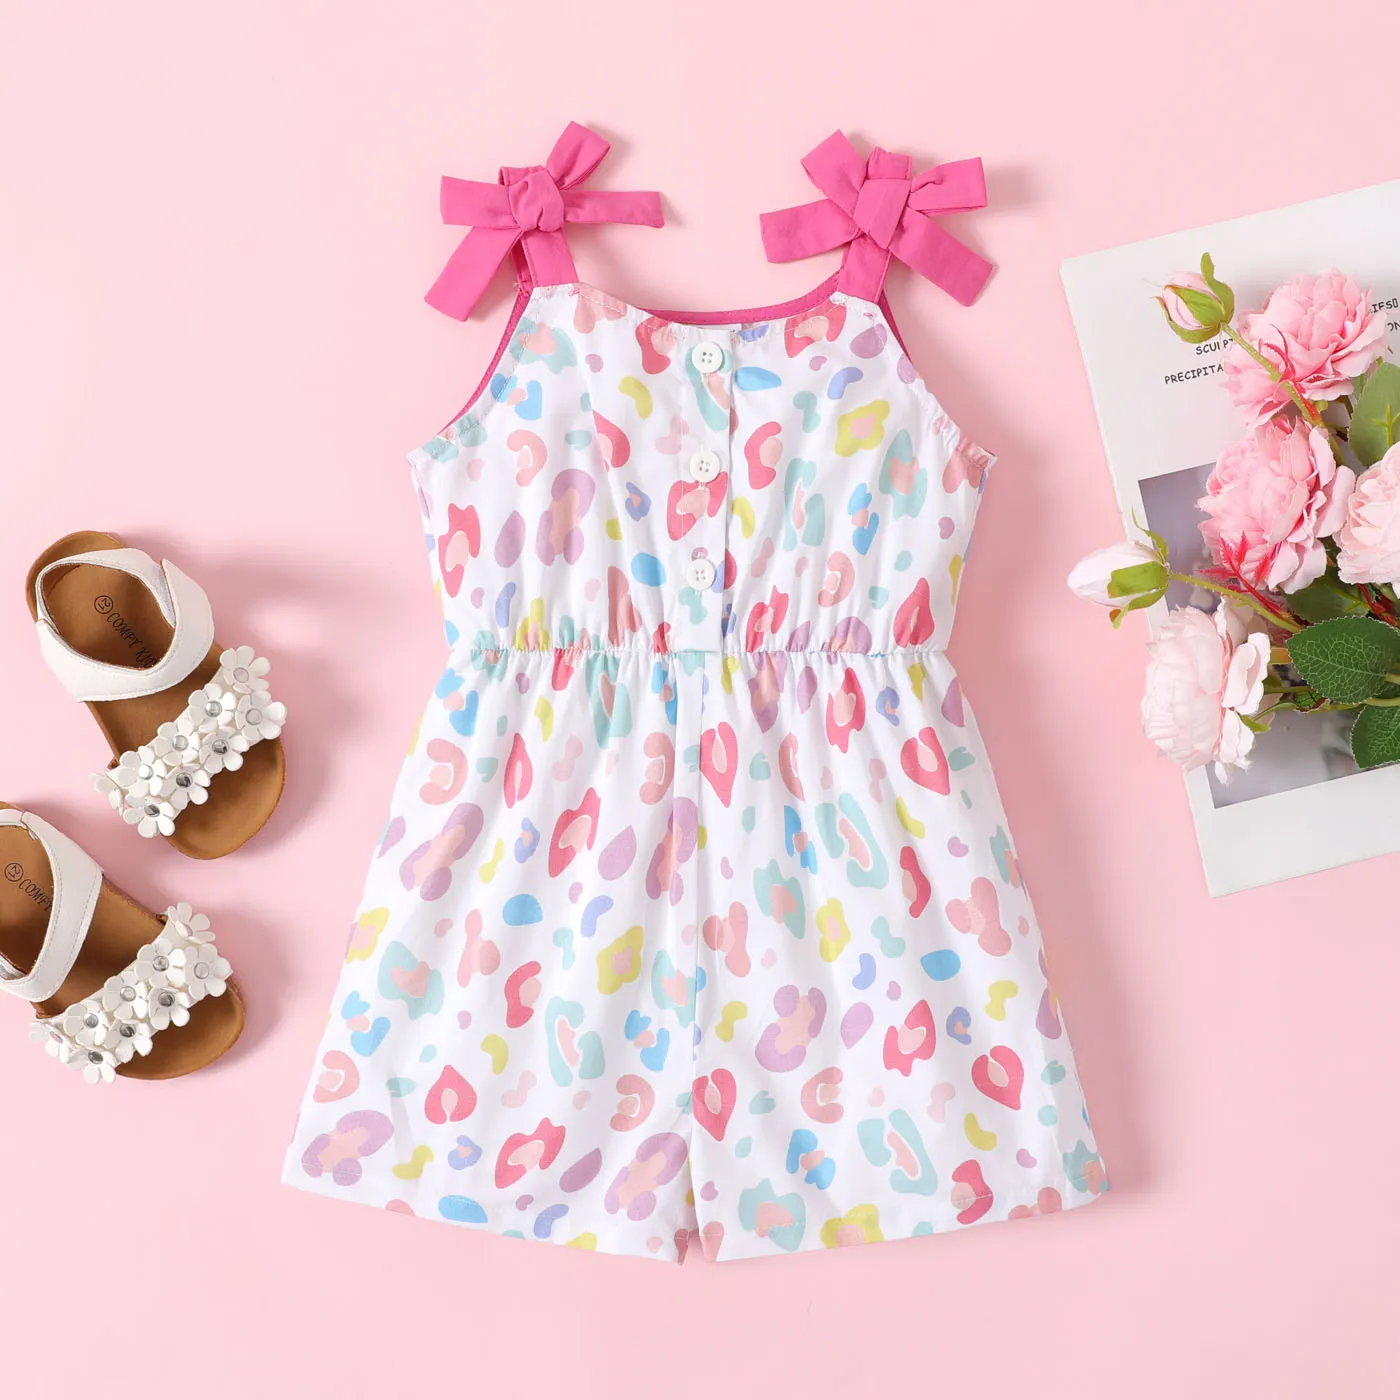 Tips for Dressing Your Baby in the Summer Season